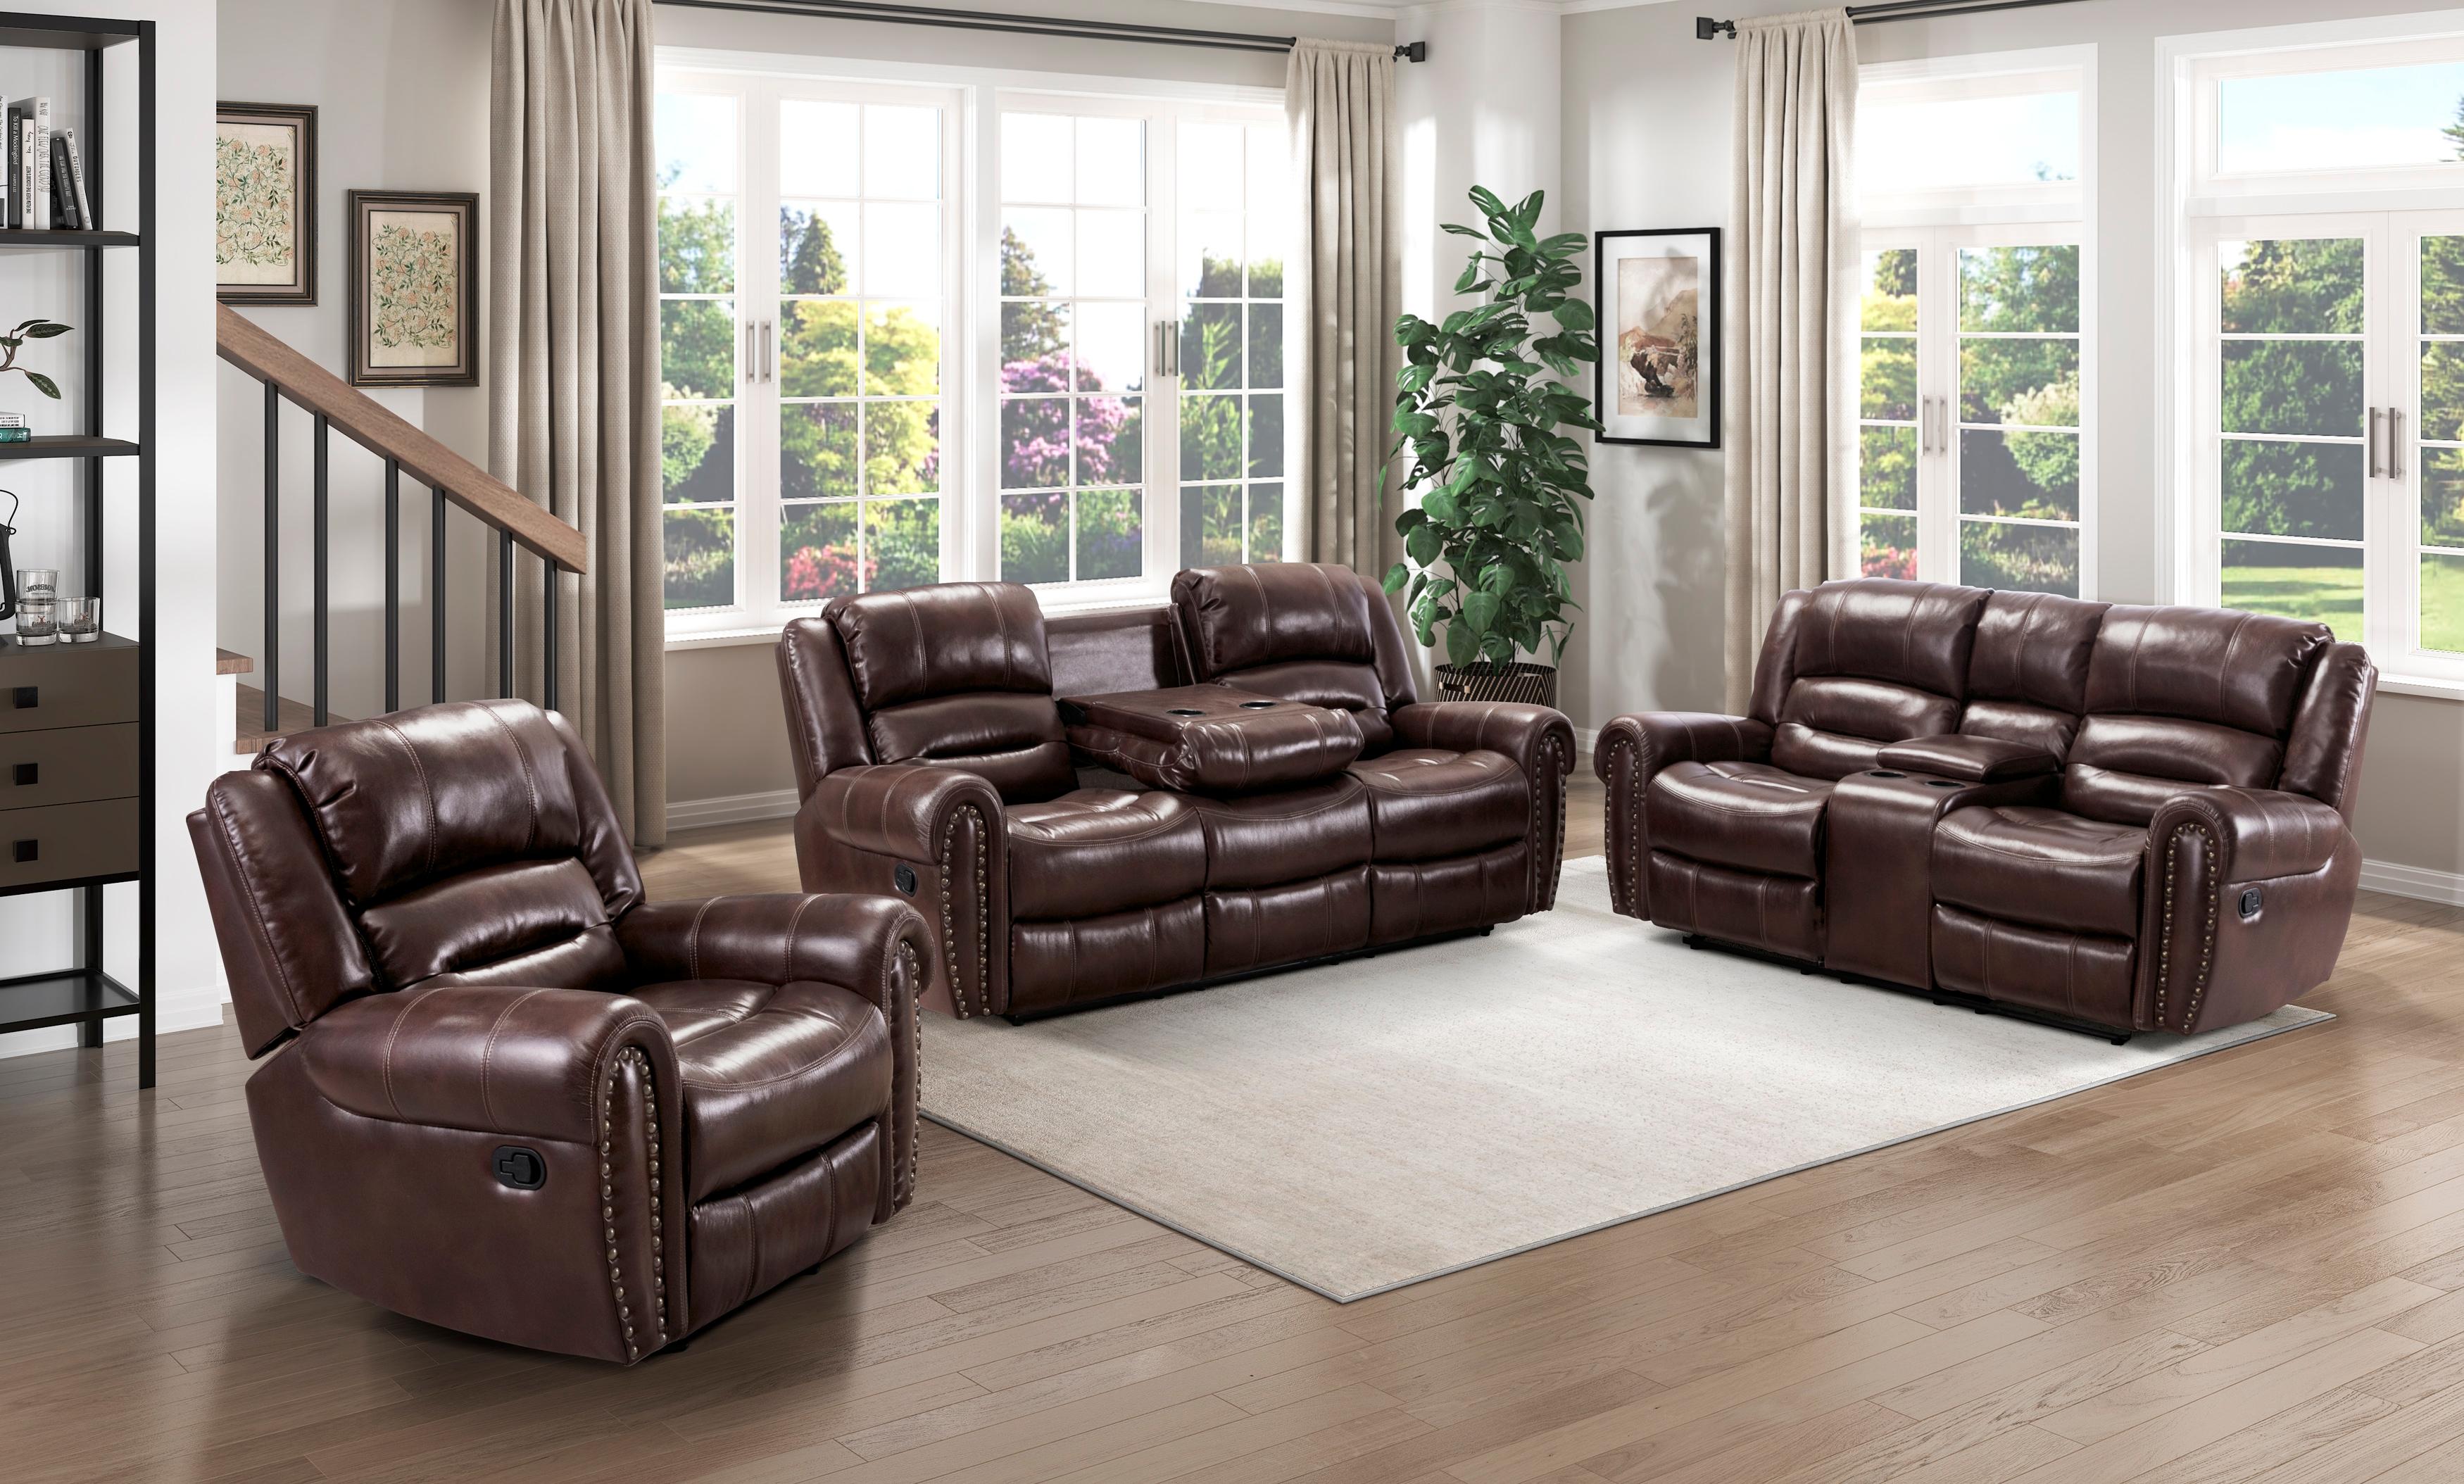 

    
9668NBR-1 Traditional Brown Faux Leather Reclining Chair Homelegance 9668NBR-1 Center Hill
